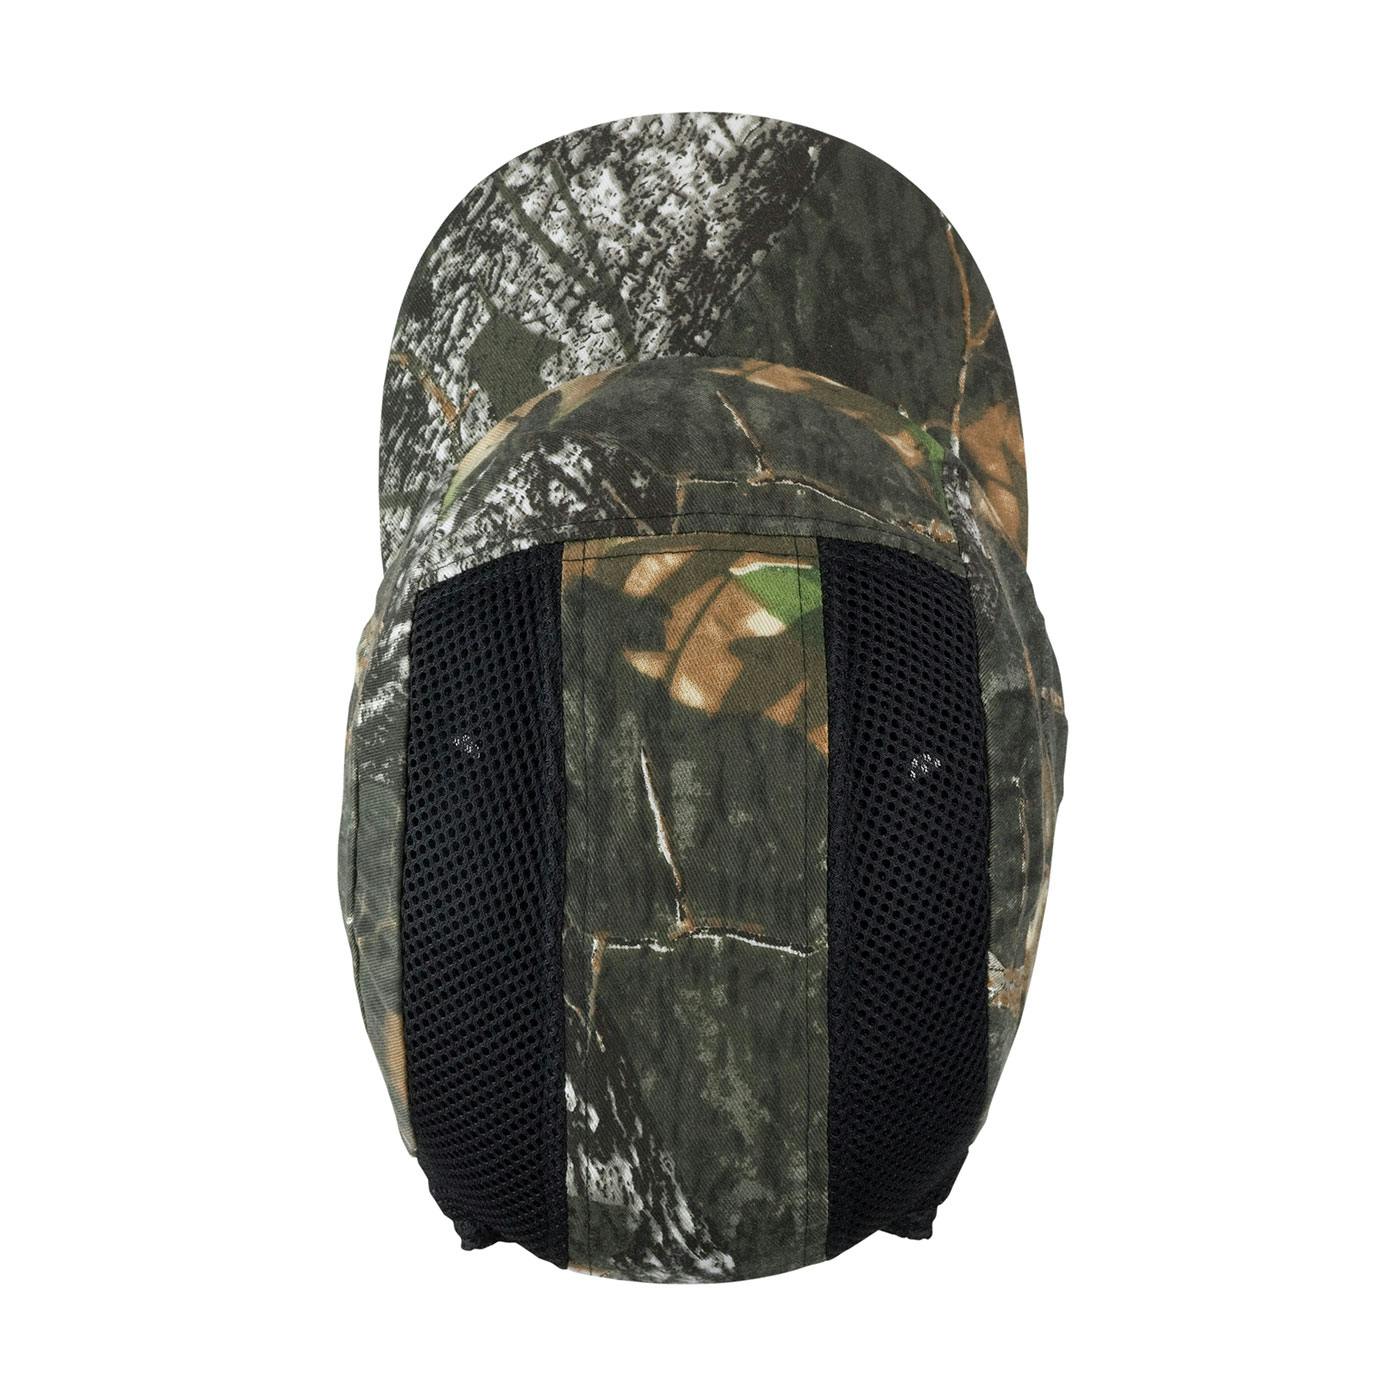 Camouflage Baseball Style Bump Cap with HDPE Protective Liner and Adjustable Back, Camouflage (282-ABR170-CAMO) - OS_2